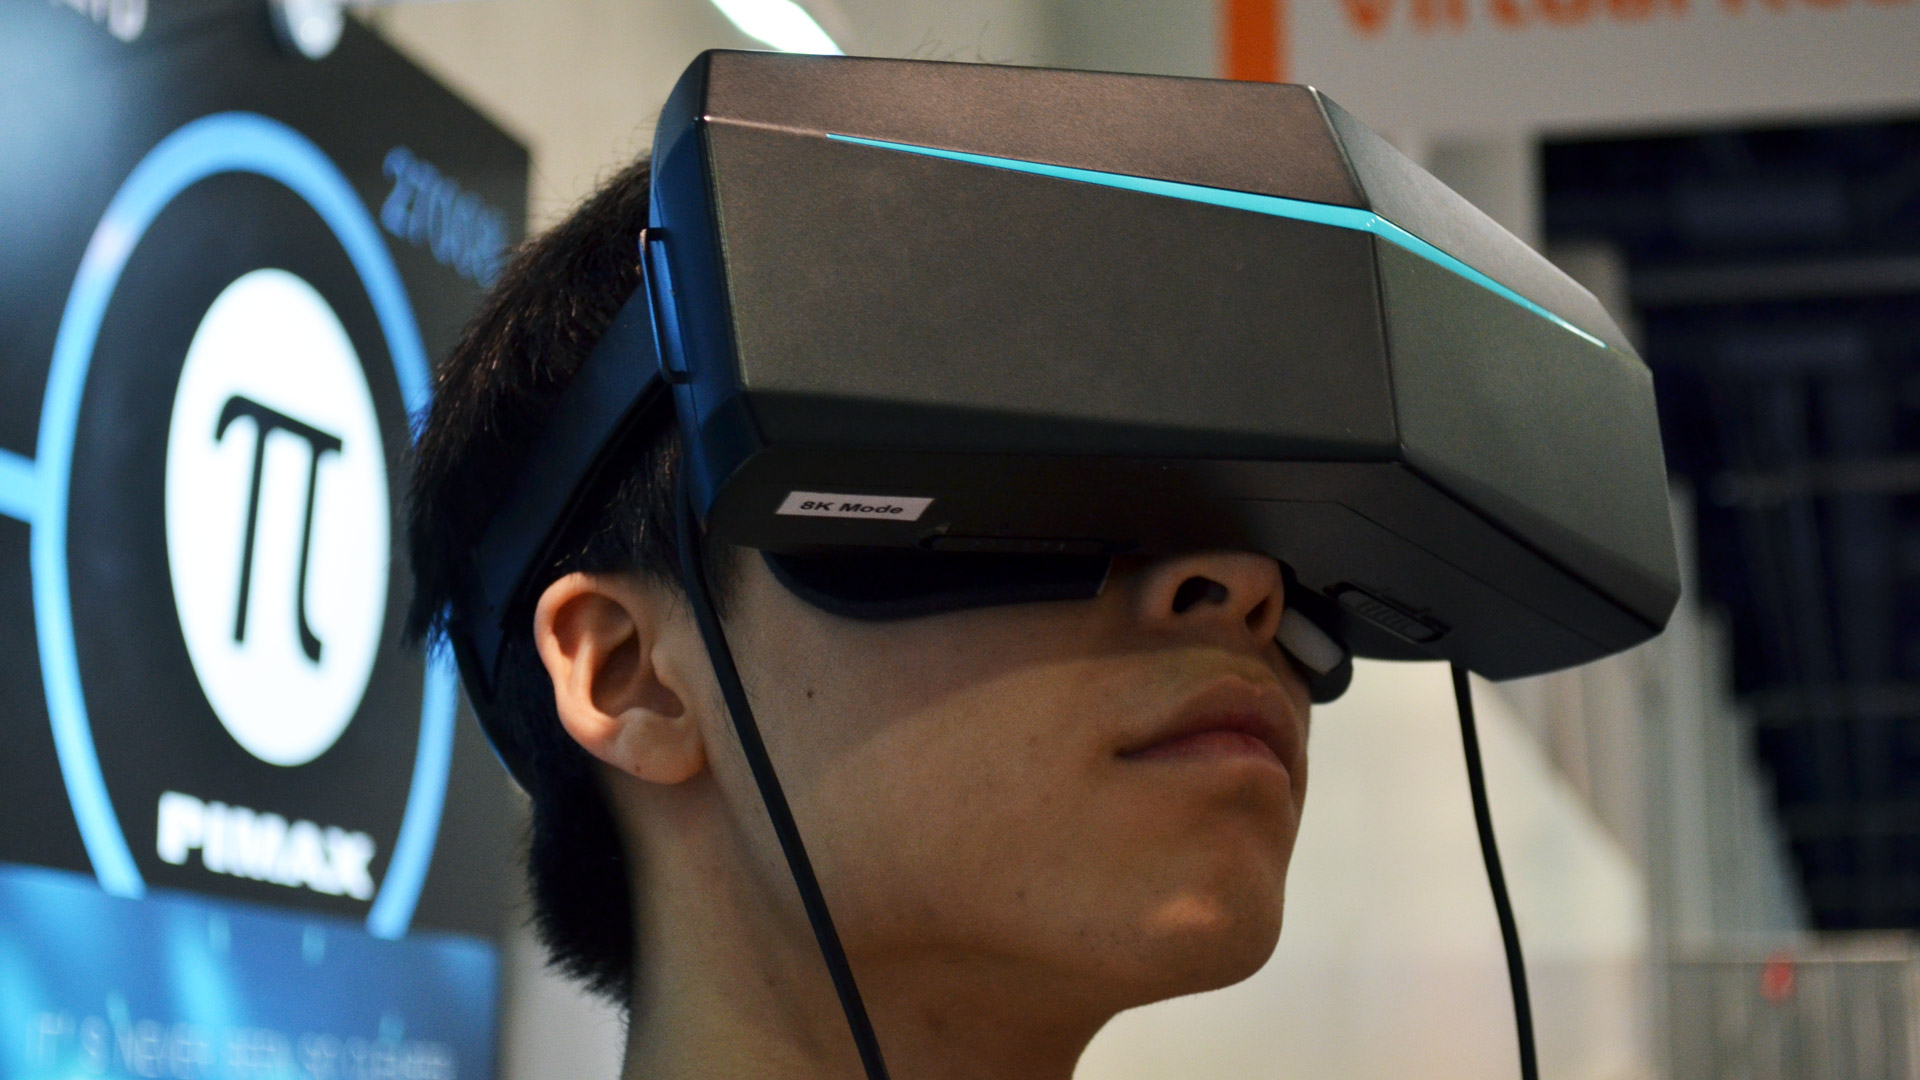 Hands-on: PiMAX's 8K Headset Proves that High VR is Coming – Road to VR